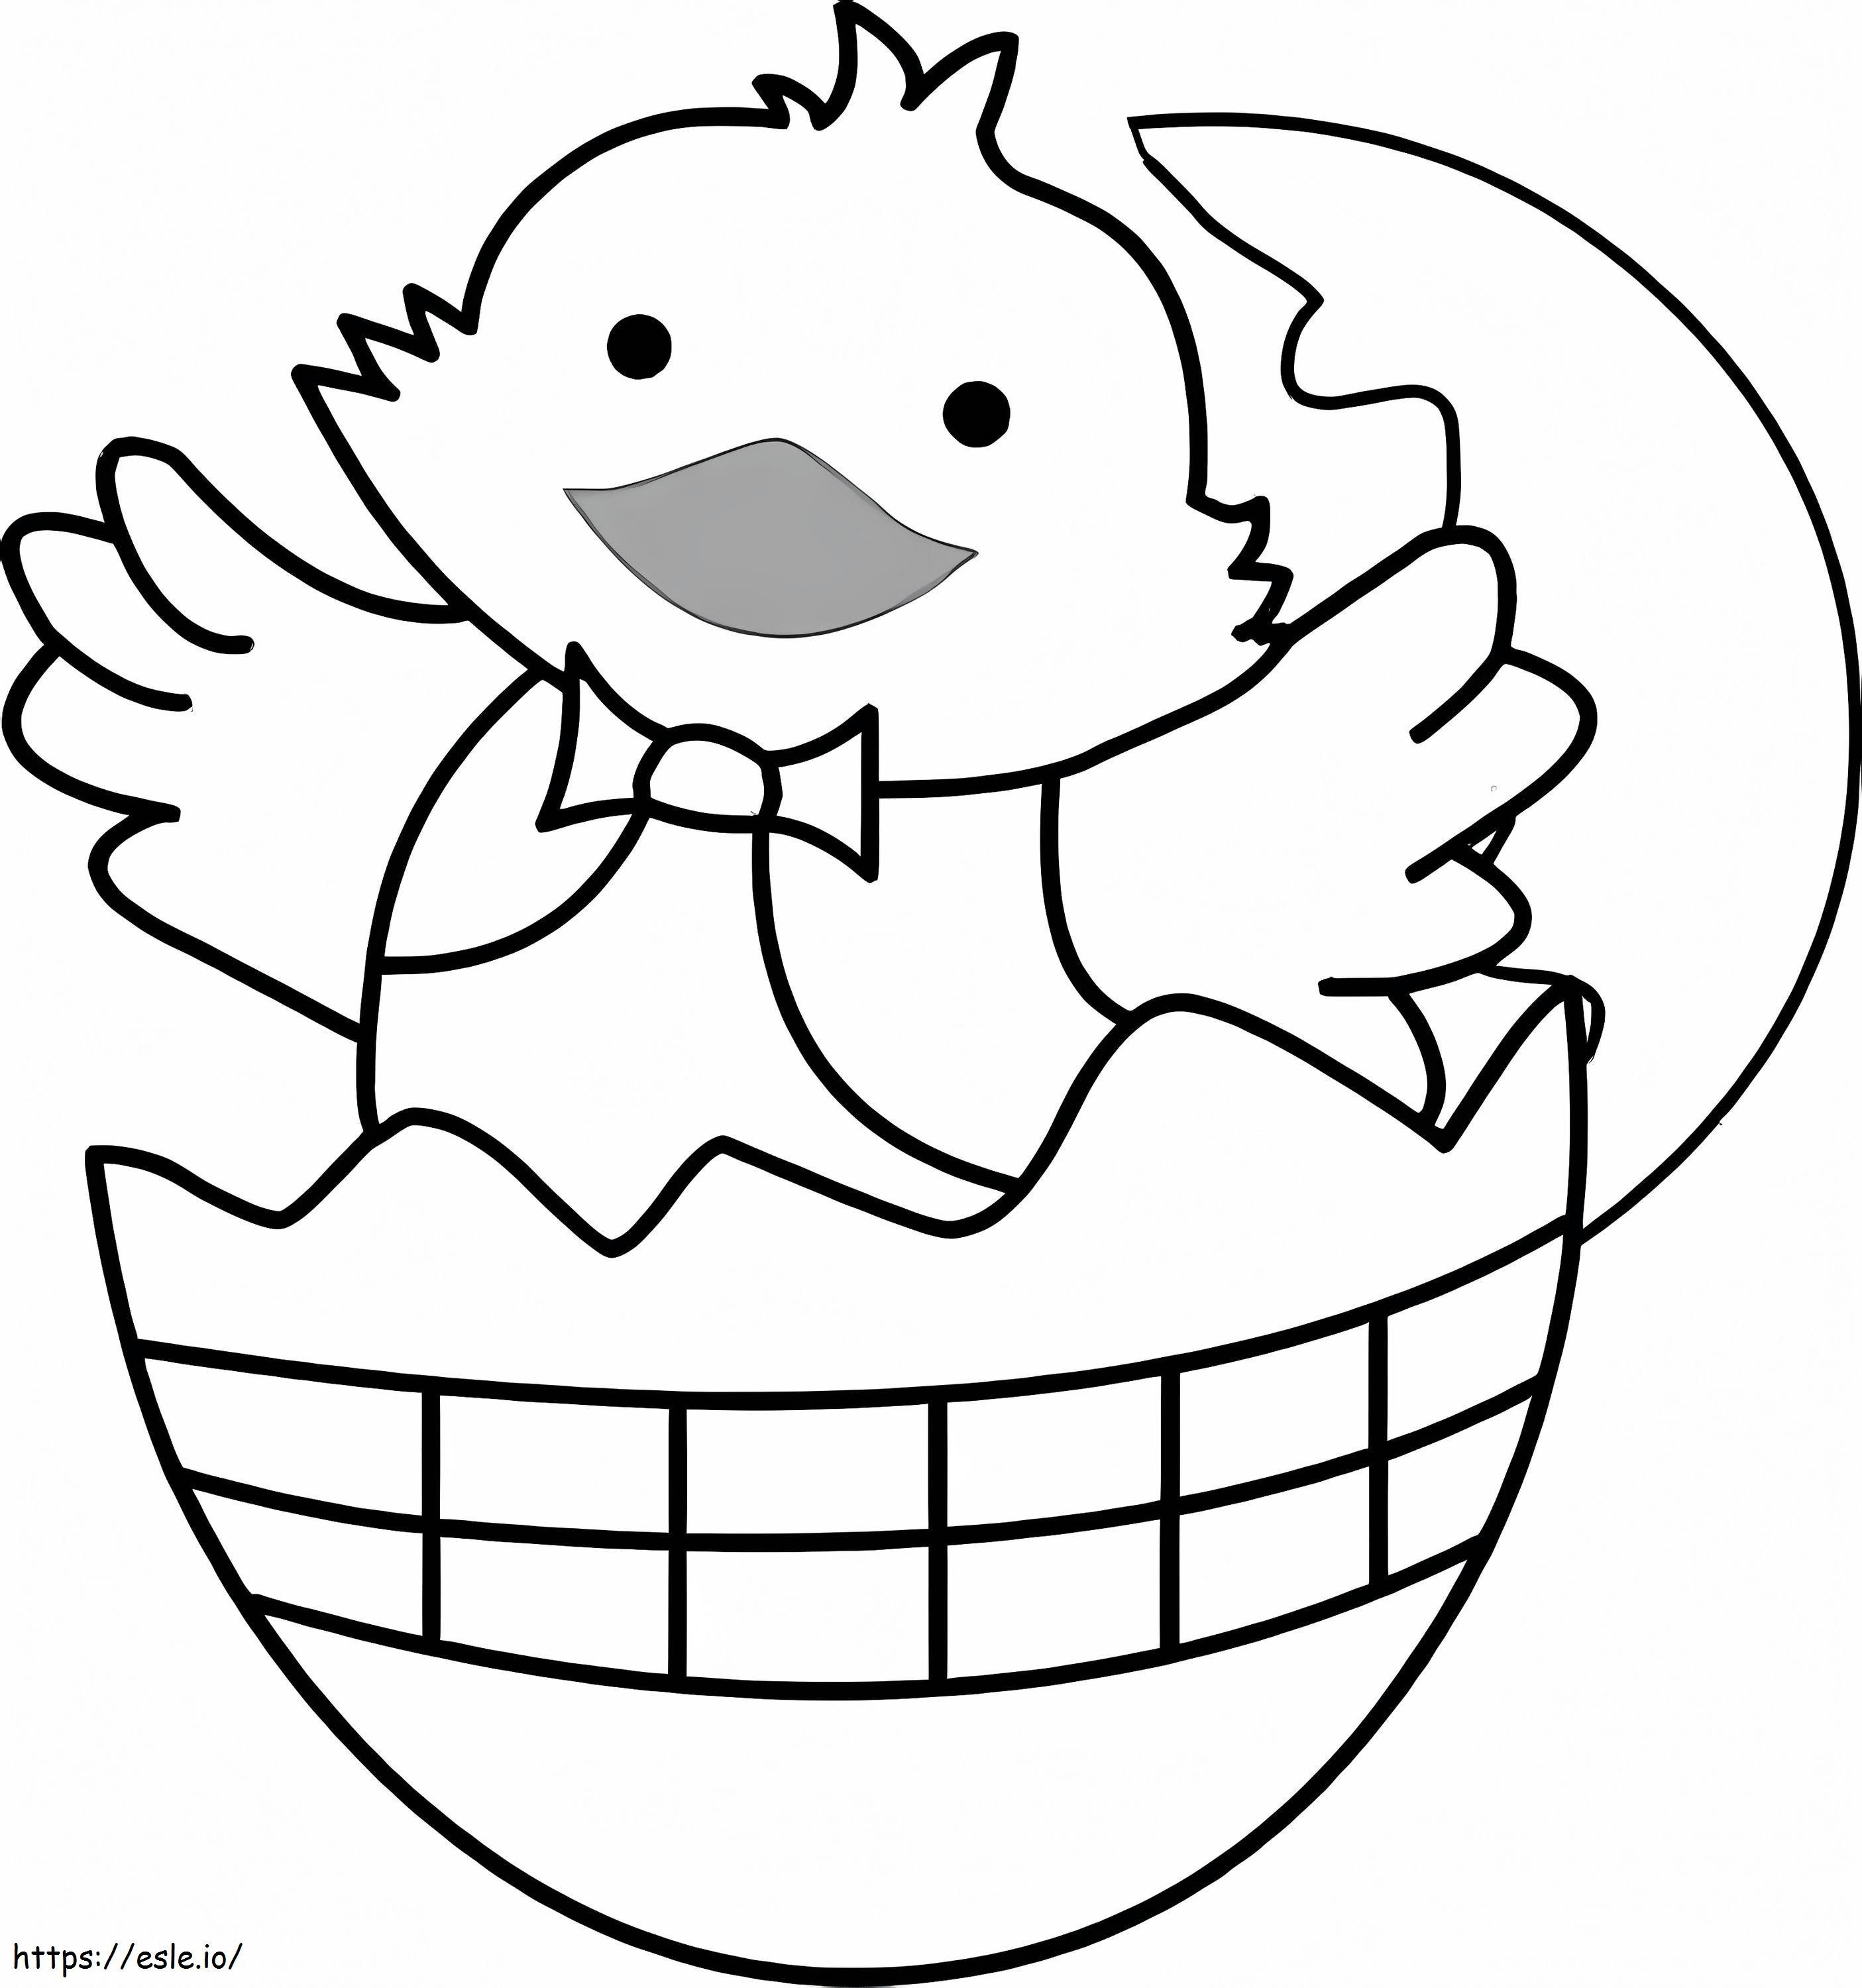 Amazing Easter Chick coloring page